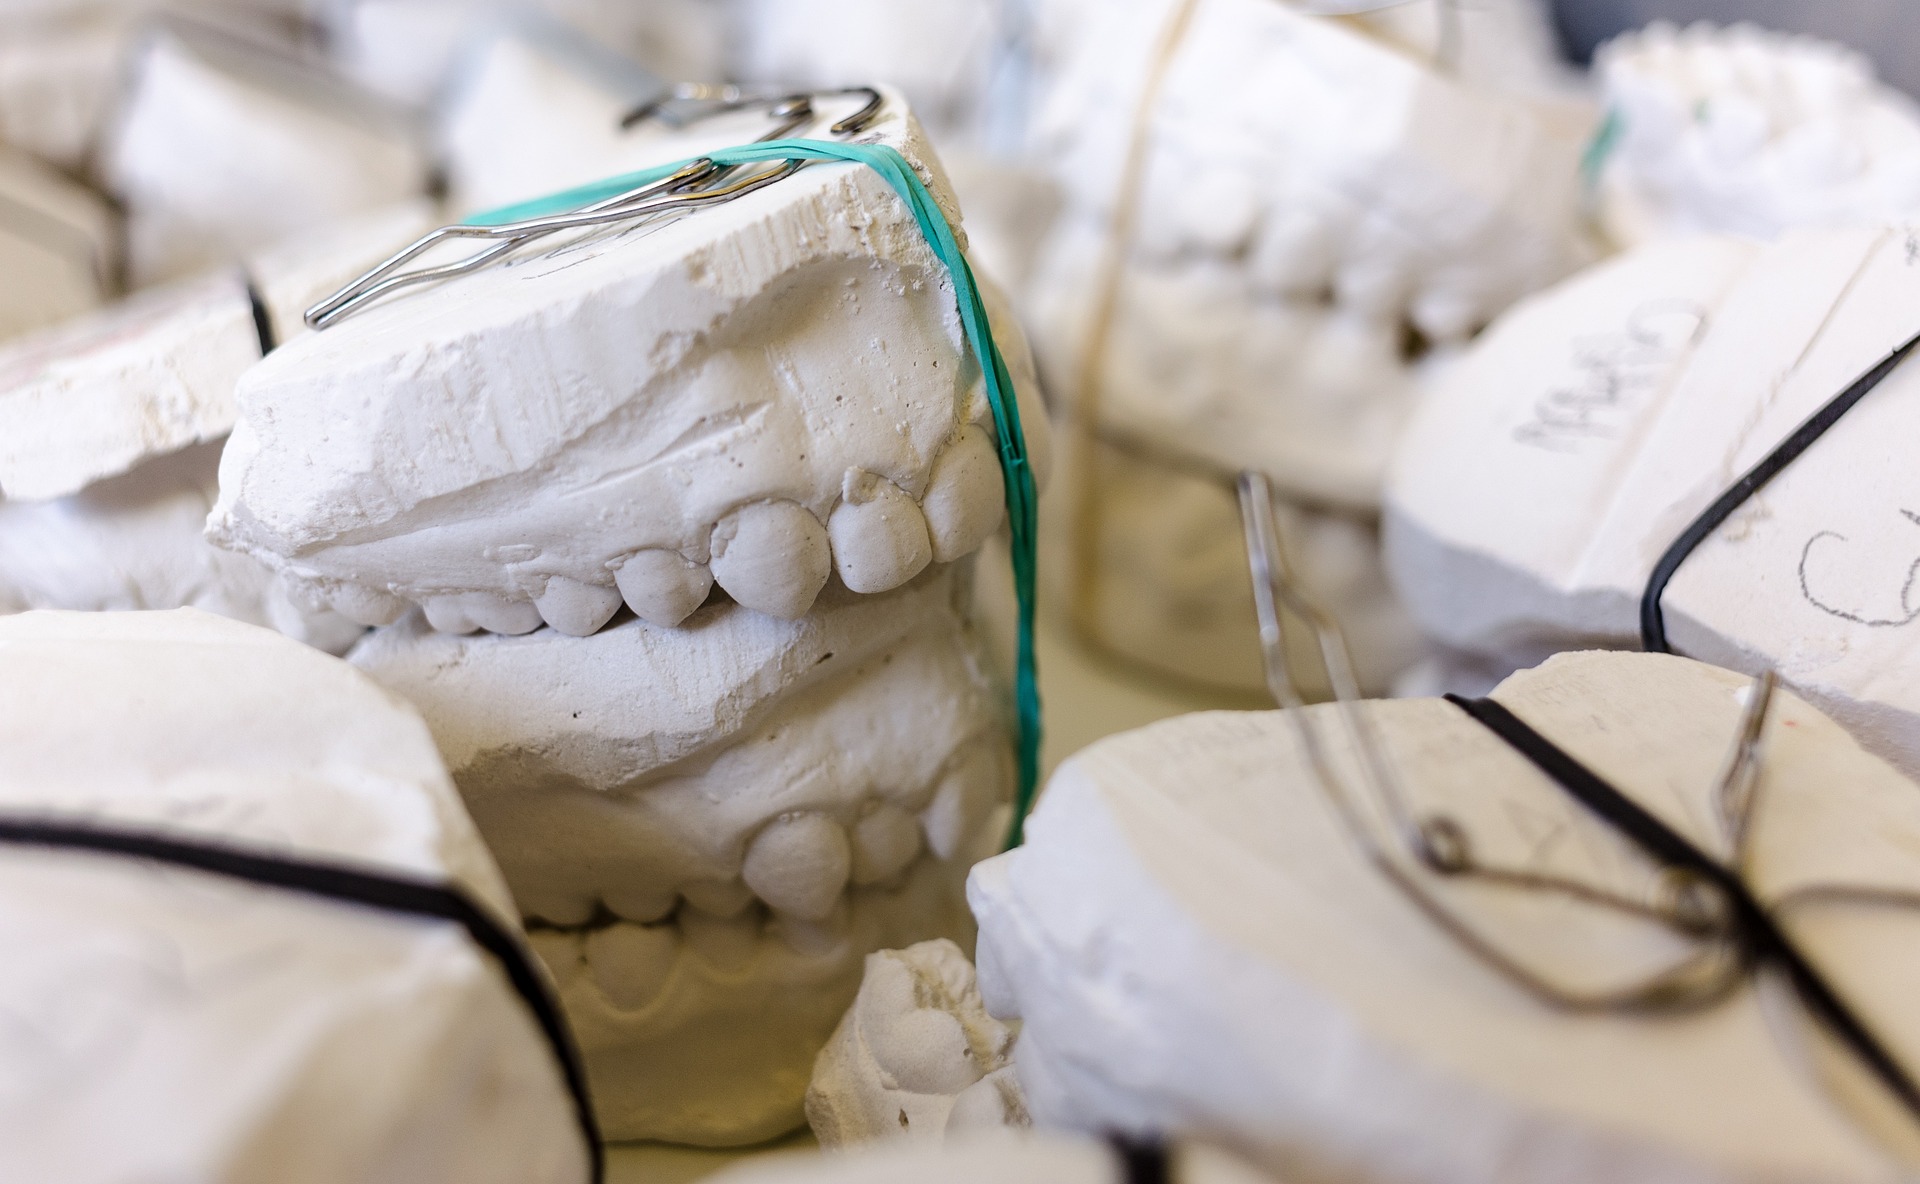 Plaster models poured at an orthodontic laboratory.